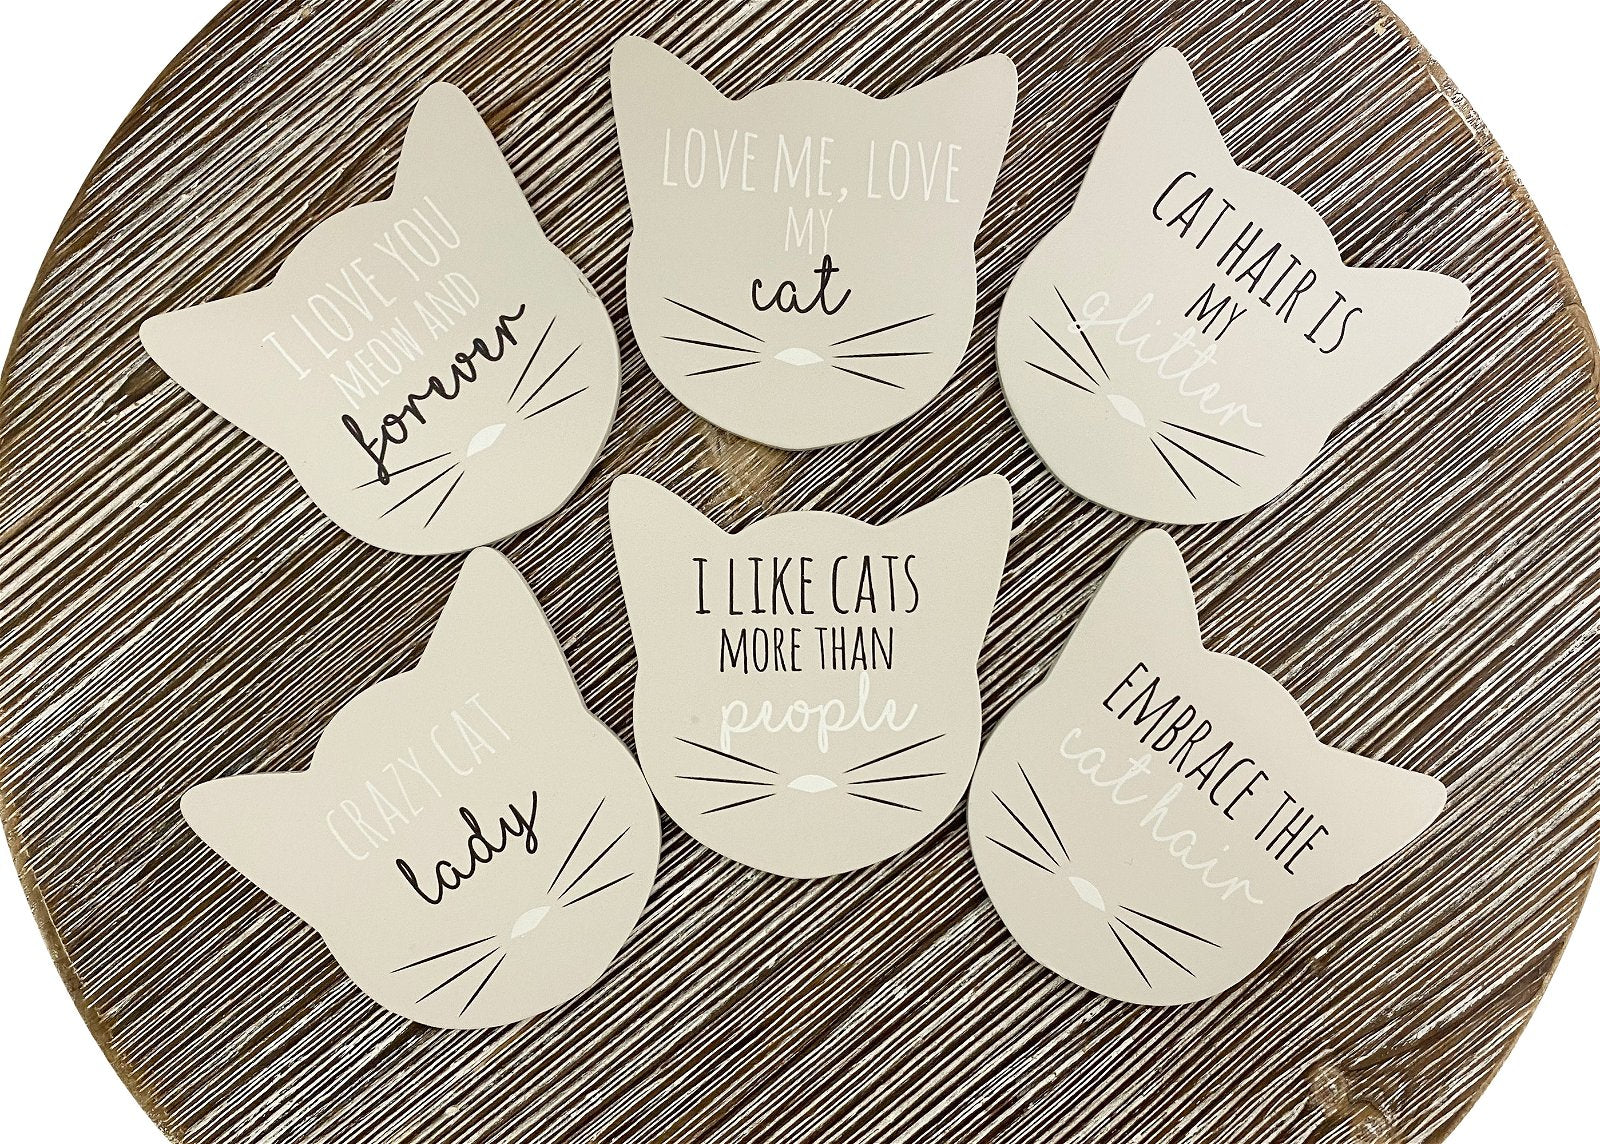 Set of 6 Cat Shaped Coasters With Assorted Quotes